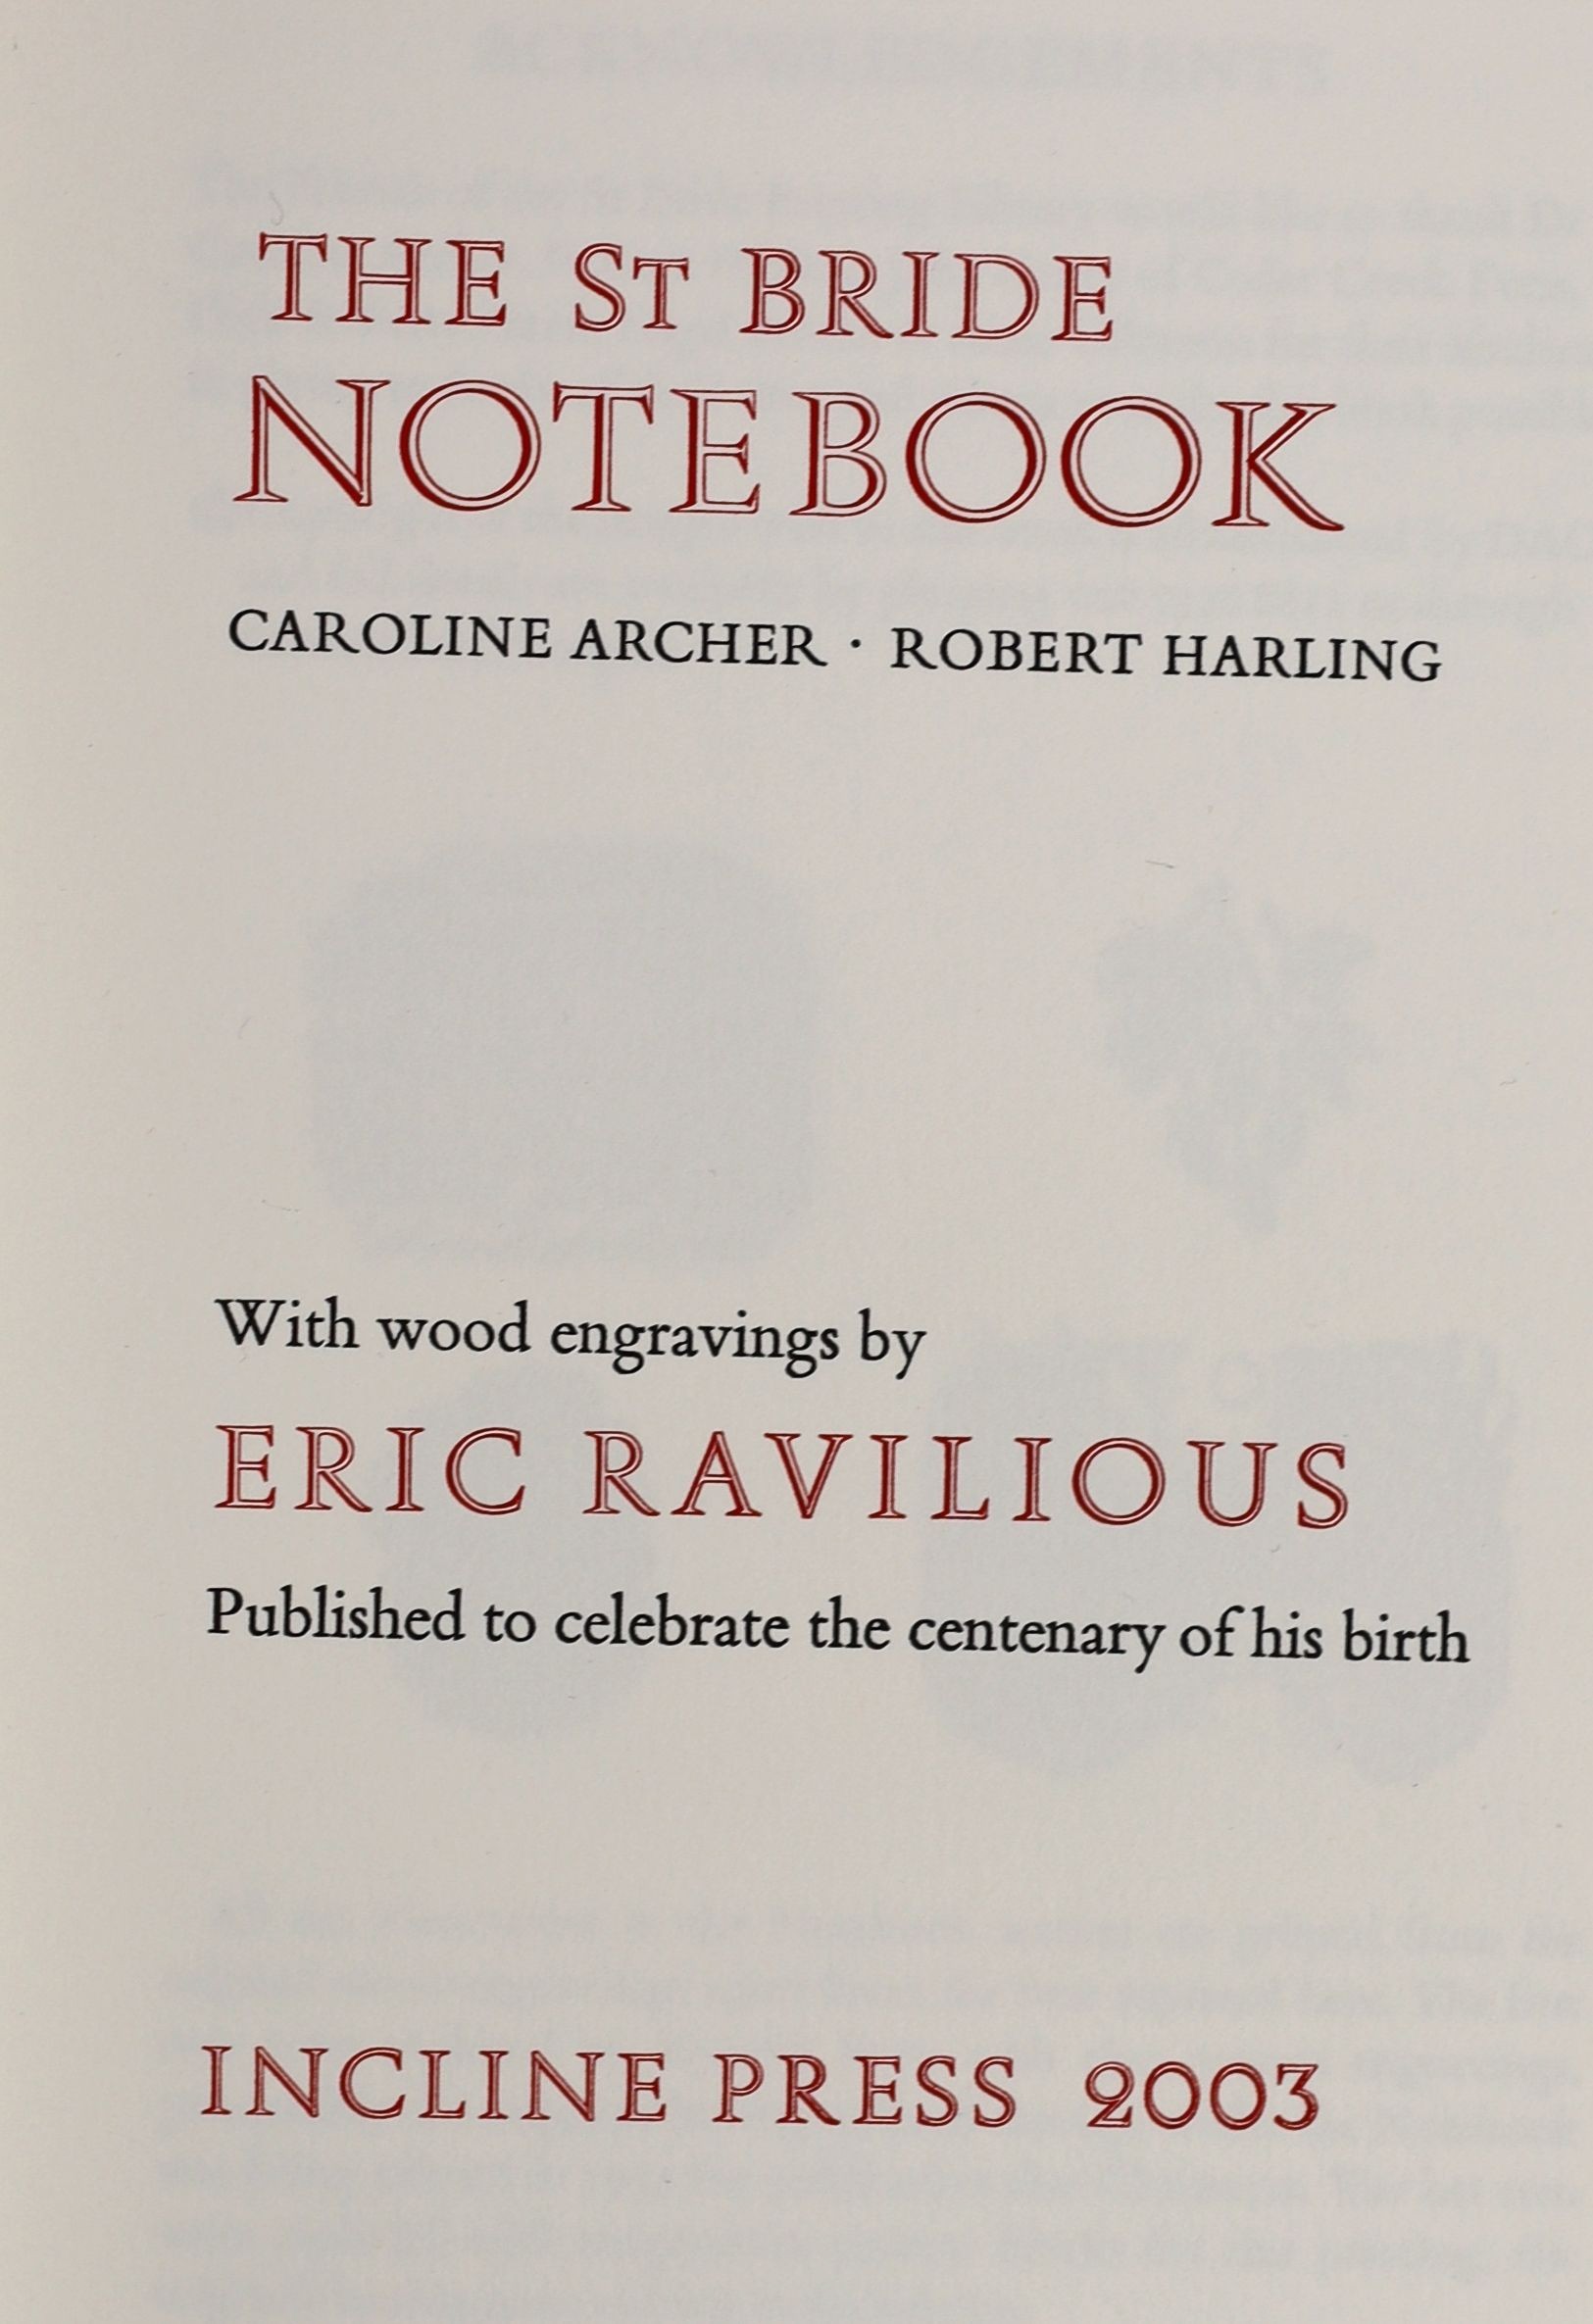 Archer, Caroline [and] Harling, Robert - The St Bride Notebook. Adorned with numerous illustrations by Eric Ravilious. Cloth with gilt letters on spine. 8vo. Incline Press, Oldham, 2003.